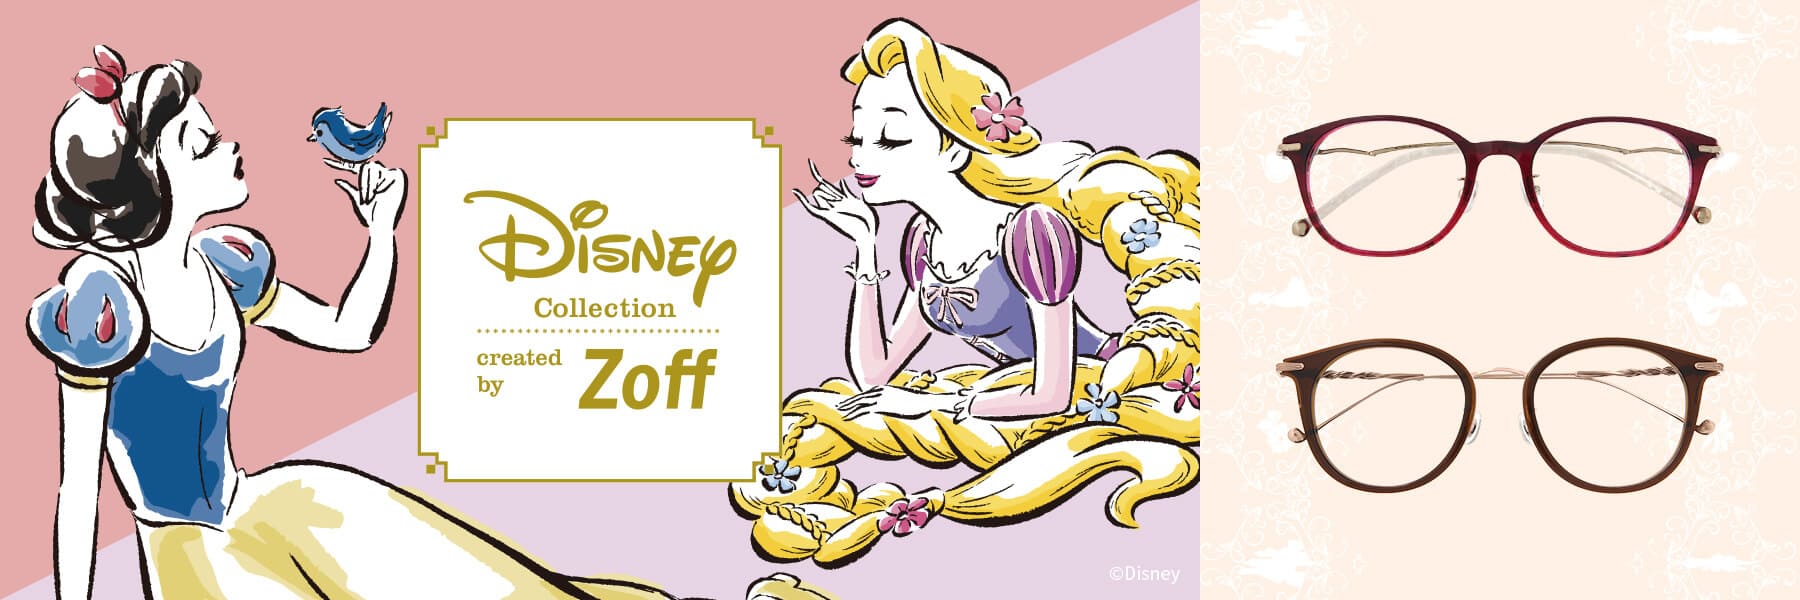 Disney collection created by Zoff